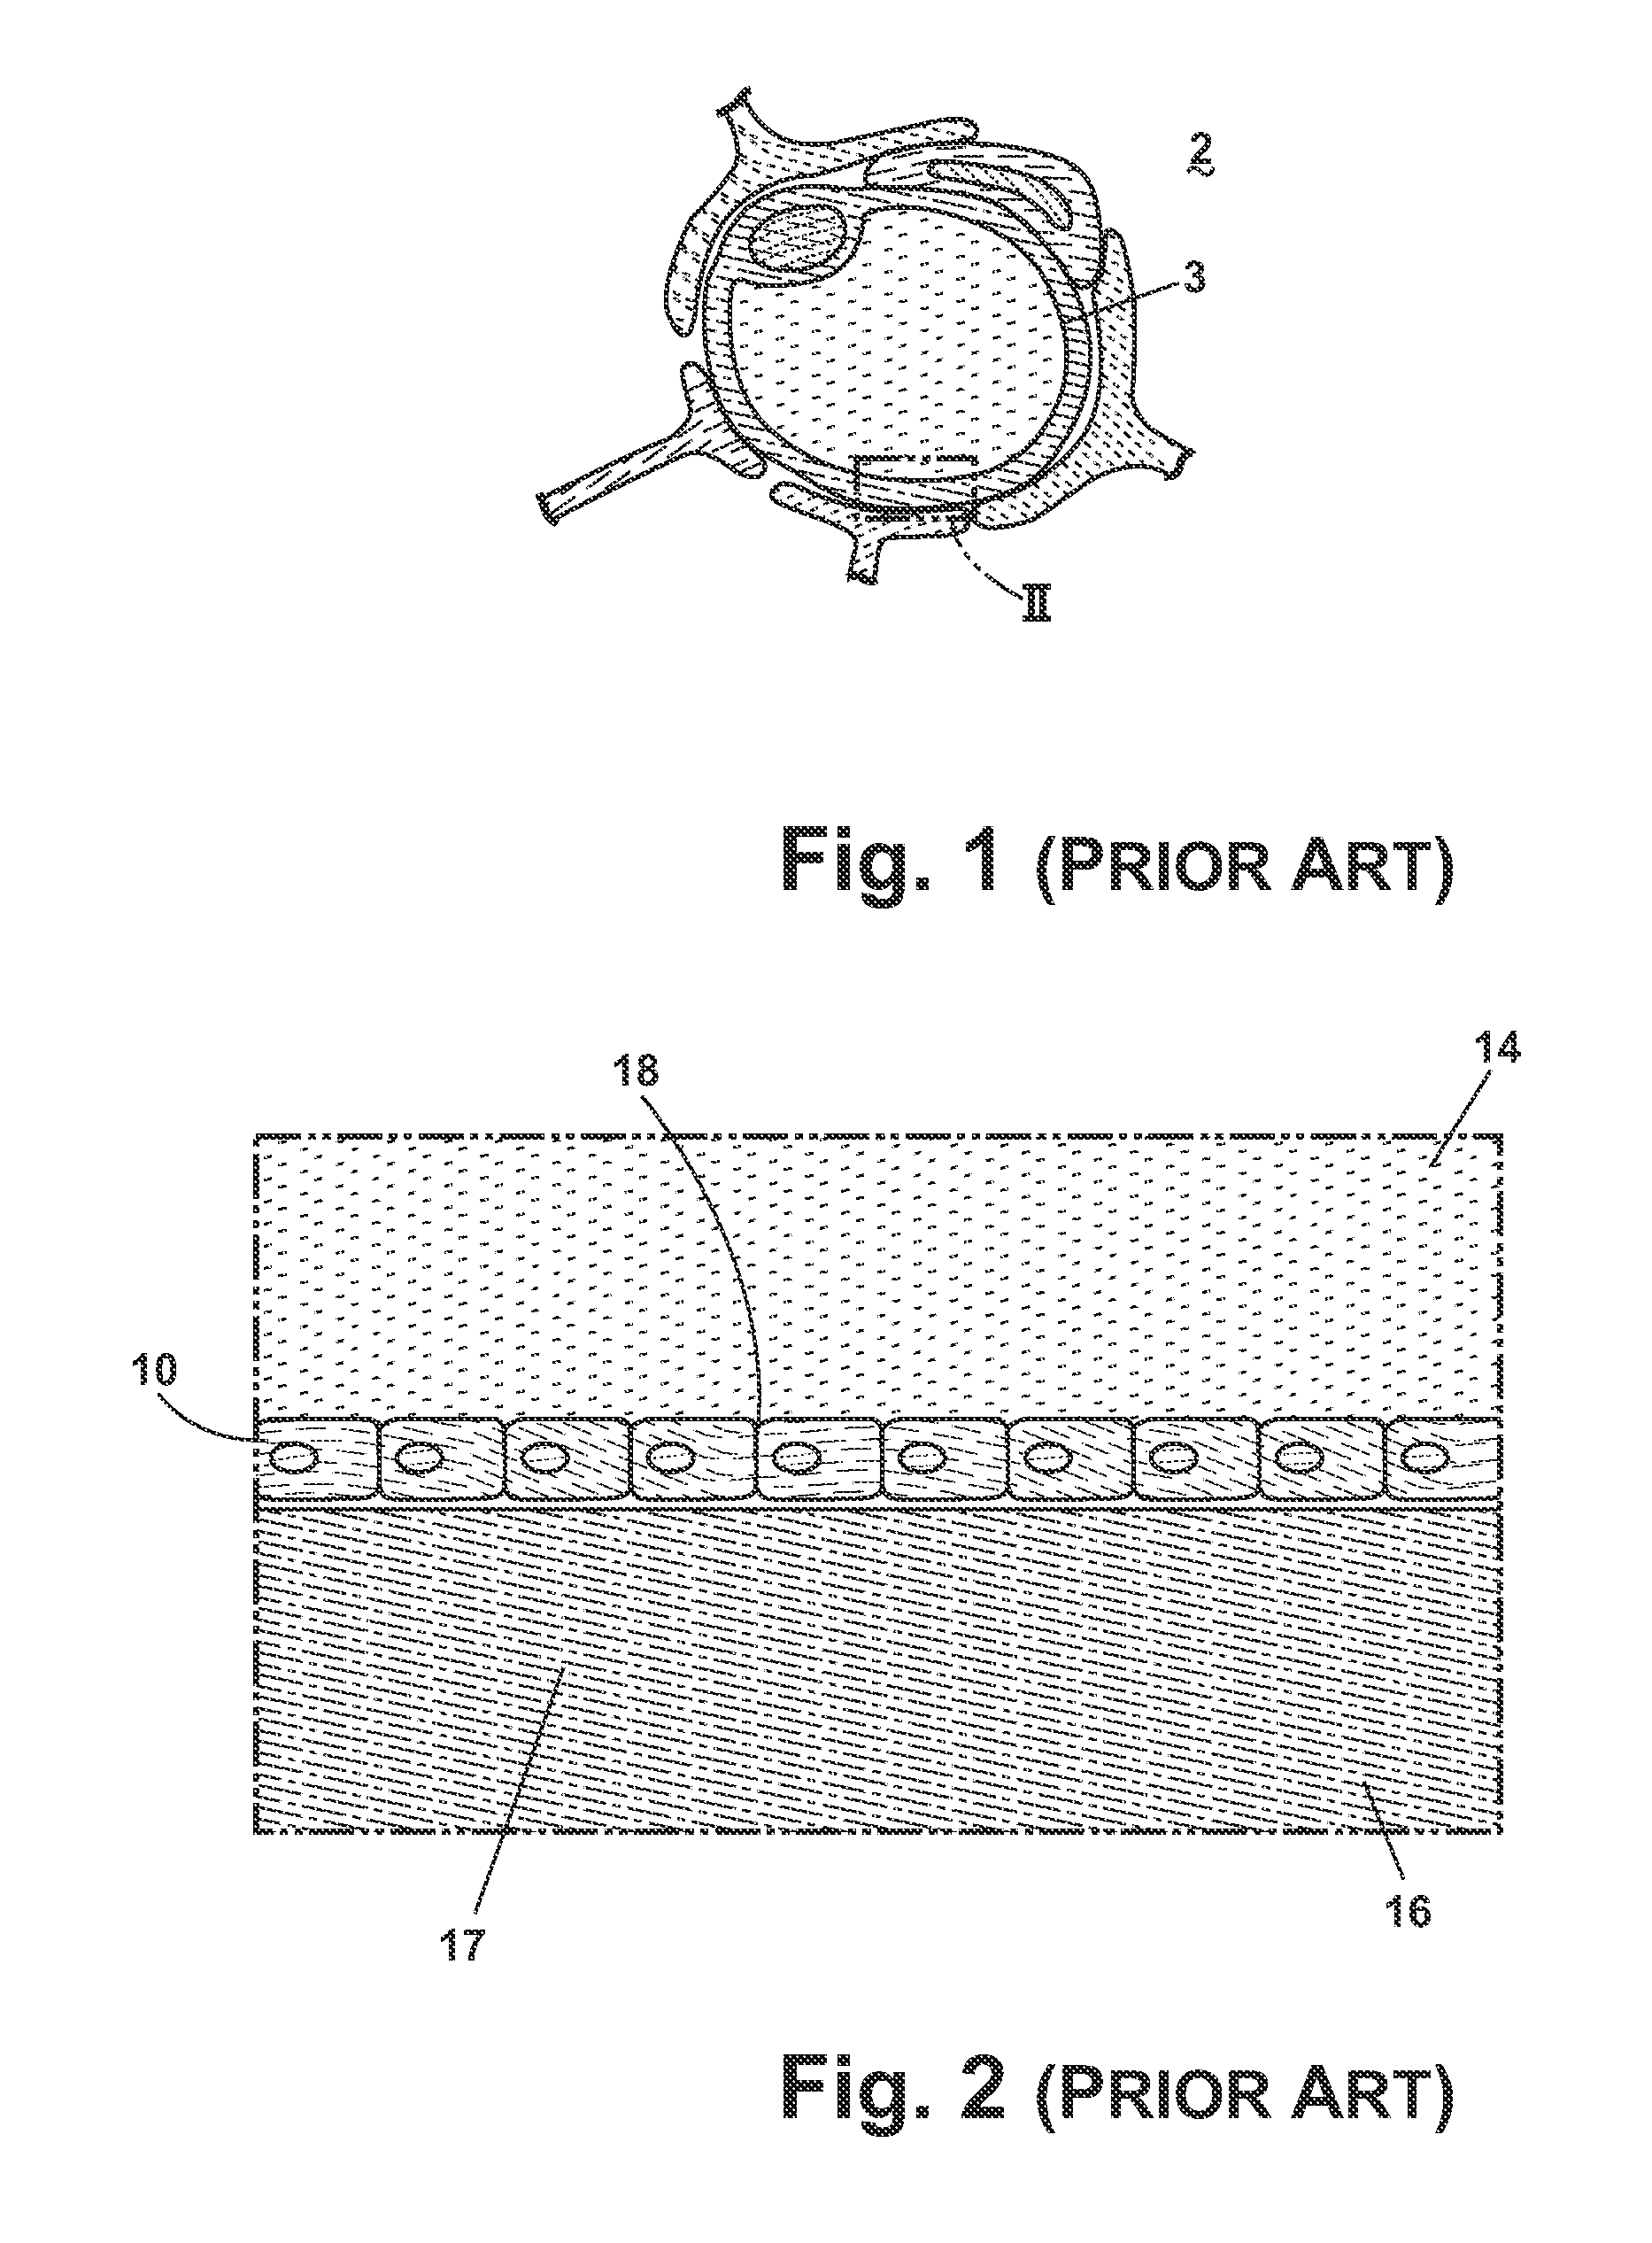 Composition and methods of treatment of bacterial meningitis